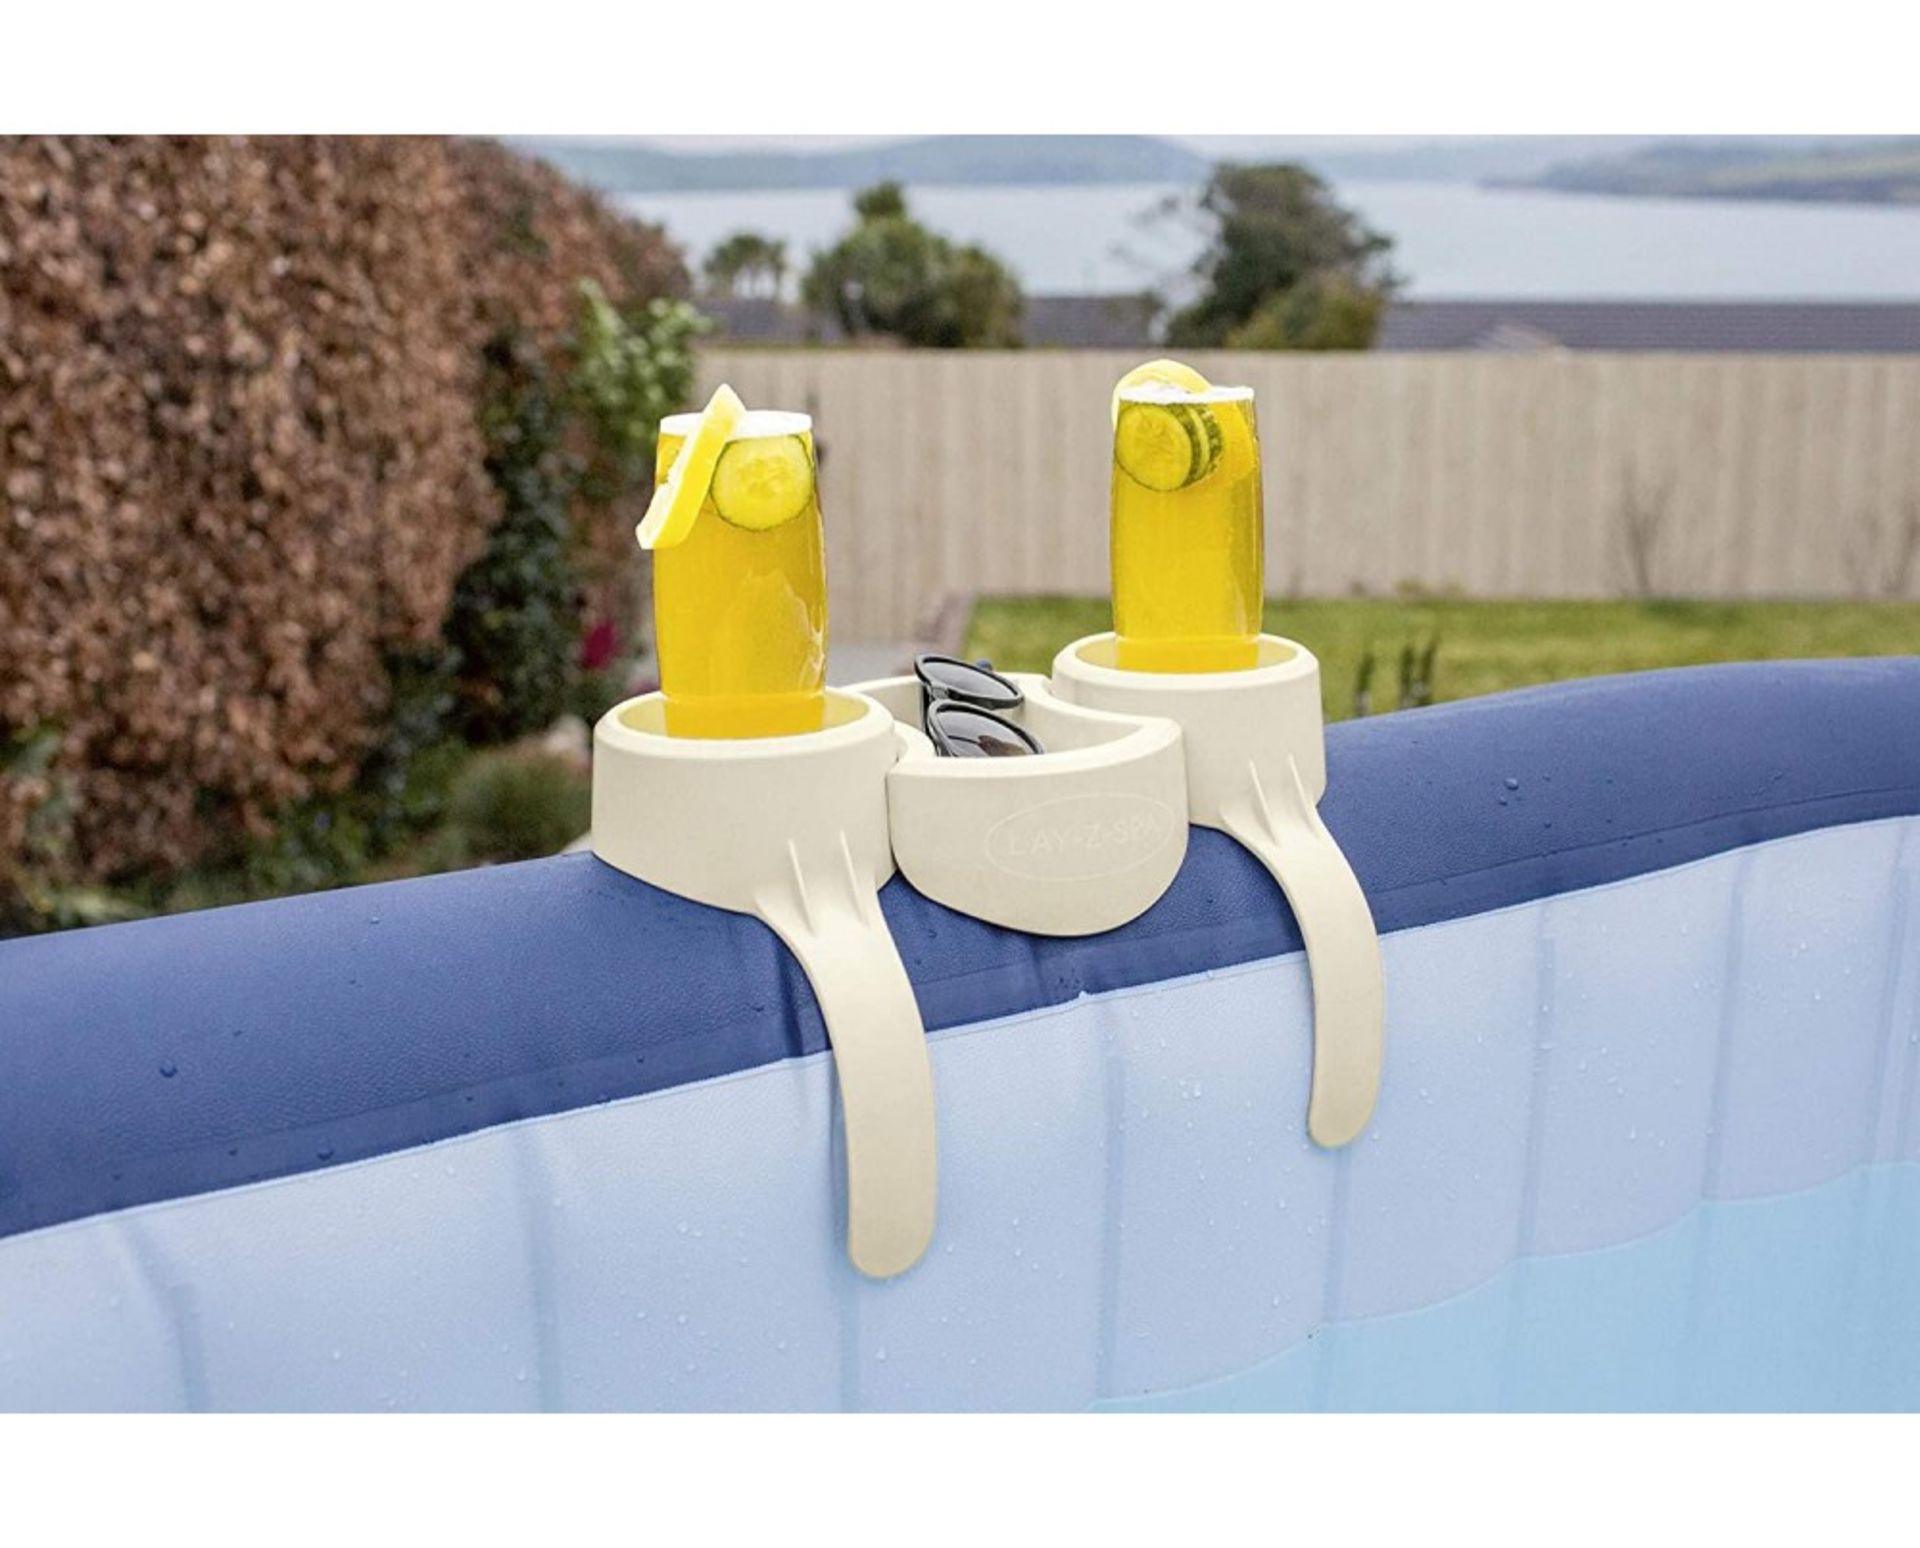 26 X BRAND NEW LAY-Z-SPA EXTRAS HOT TUB DRINKS HOLDER AND SNACK TRAY - CLIPS ON ANYWHERE ON TOP OF